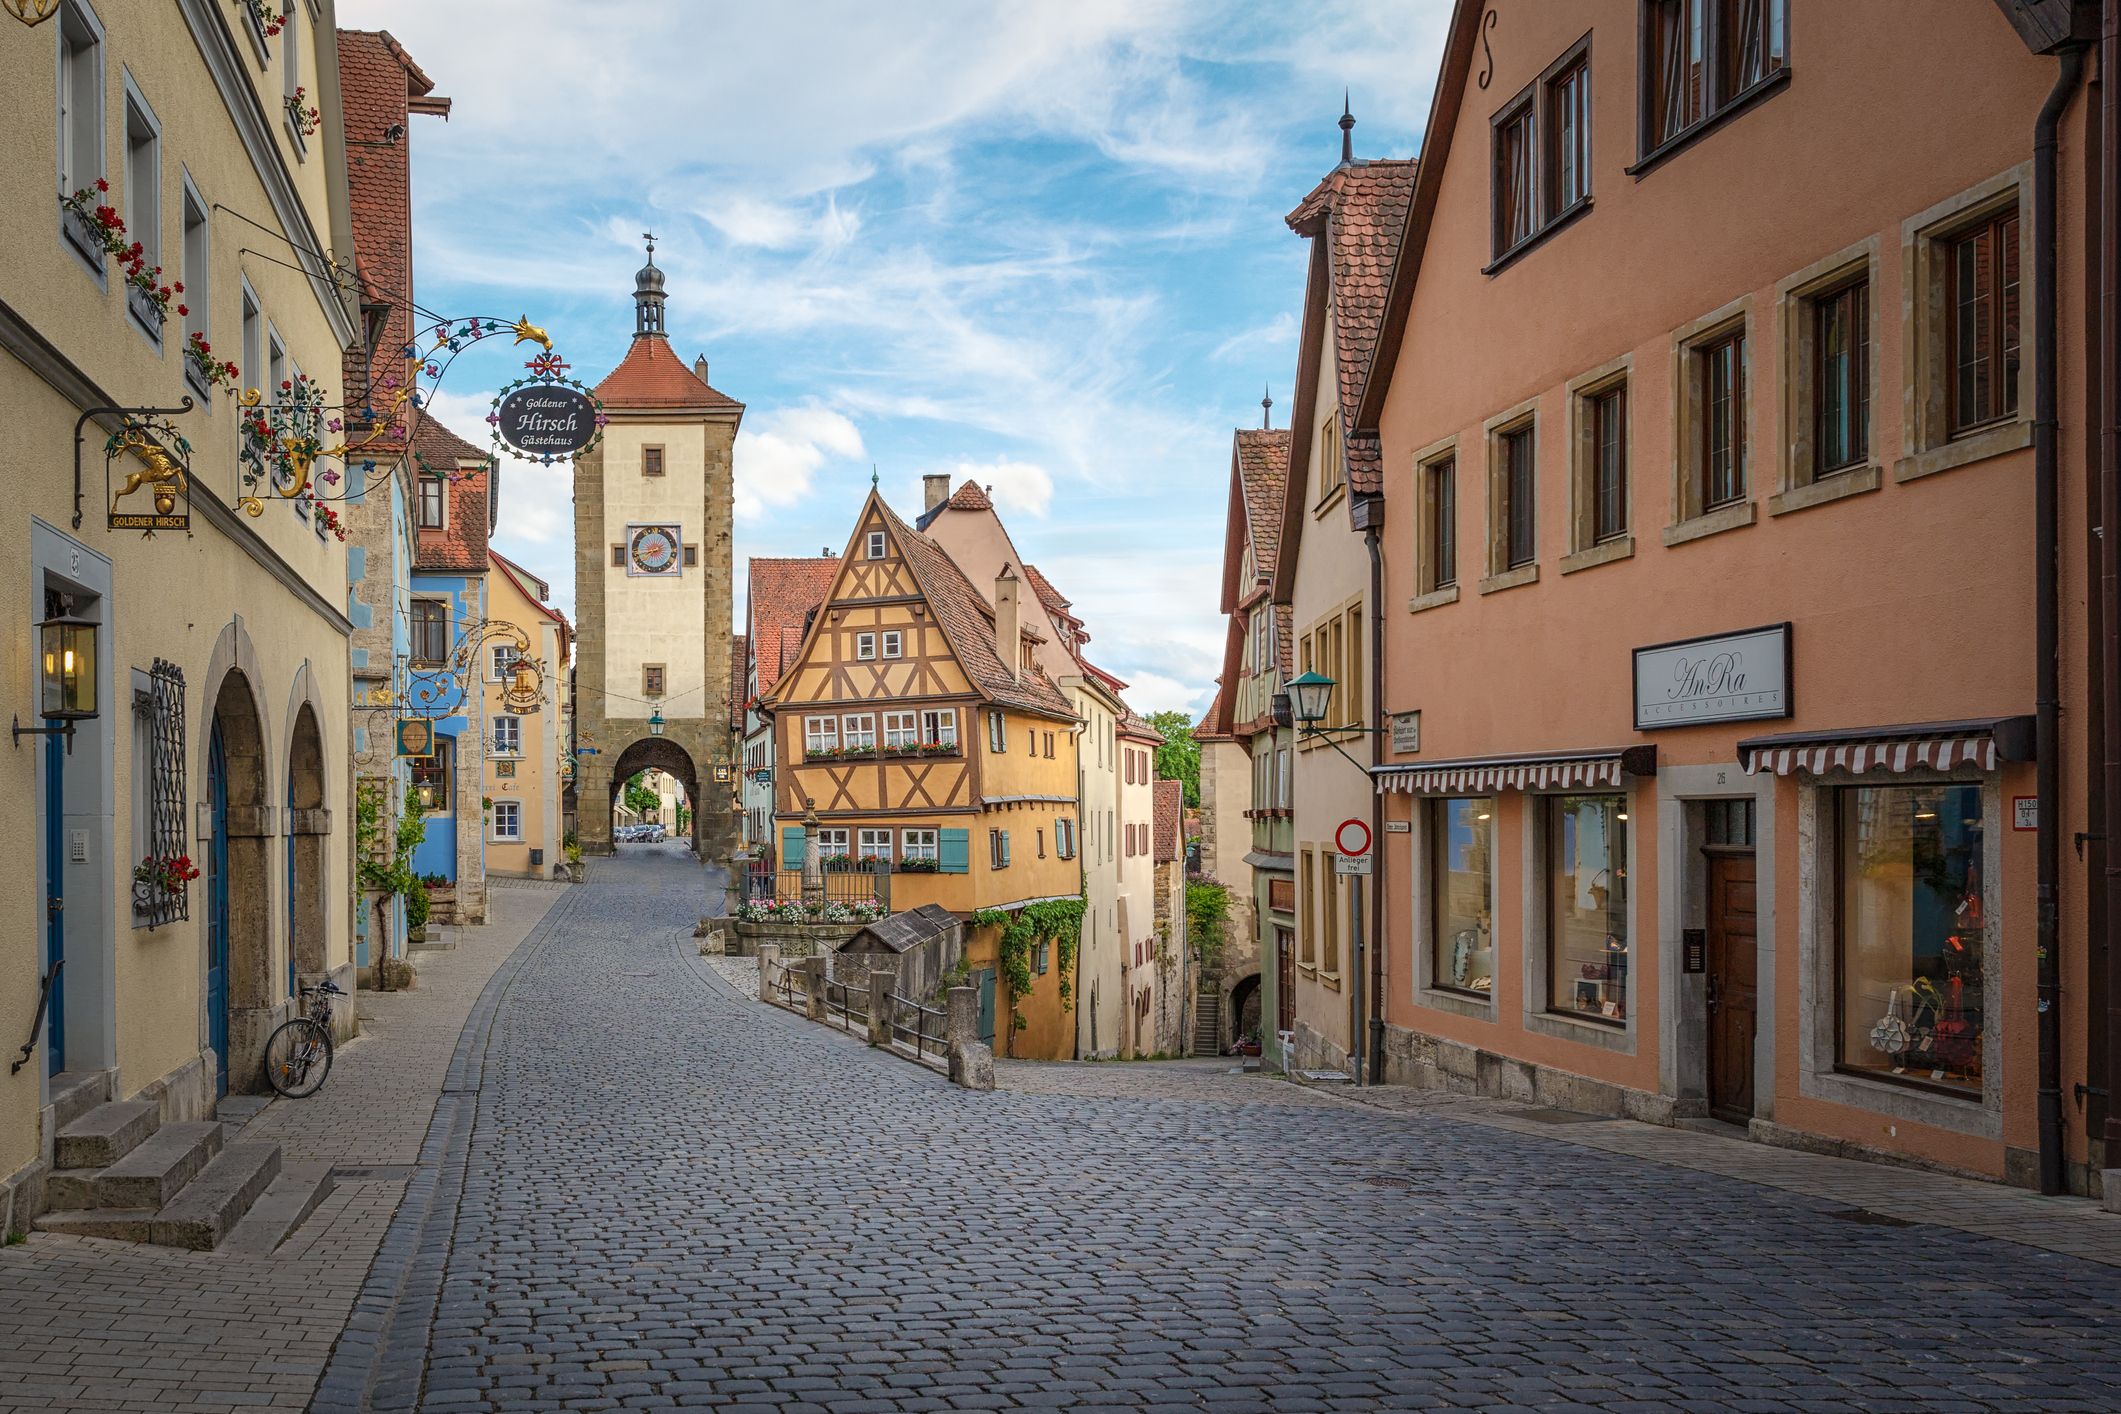 The Most Beautiful Small Towns Around the World